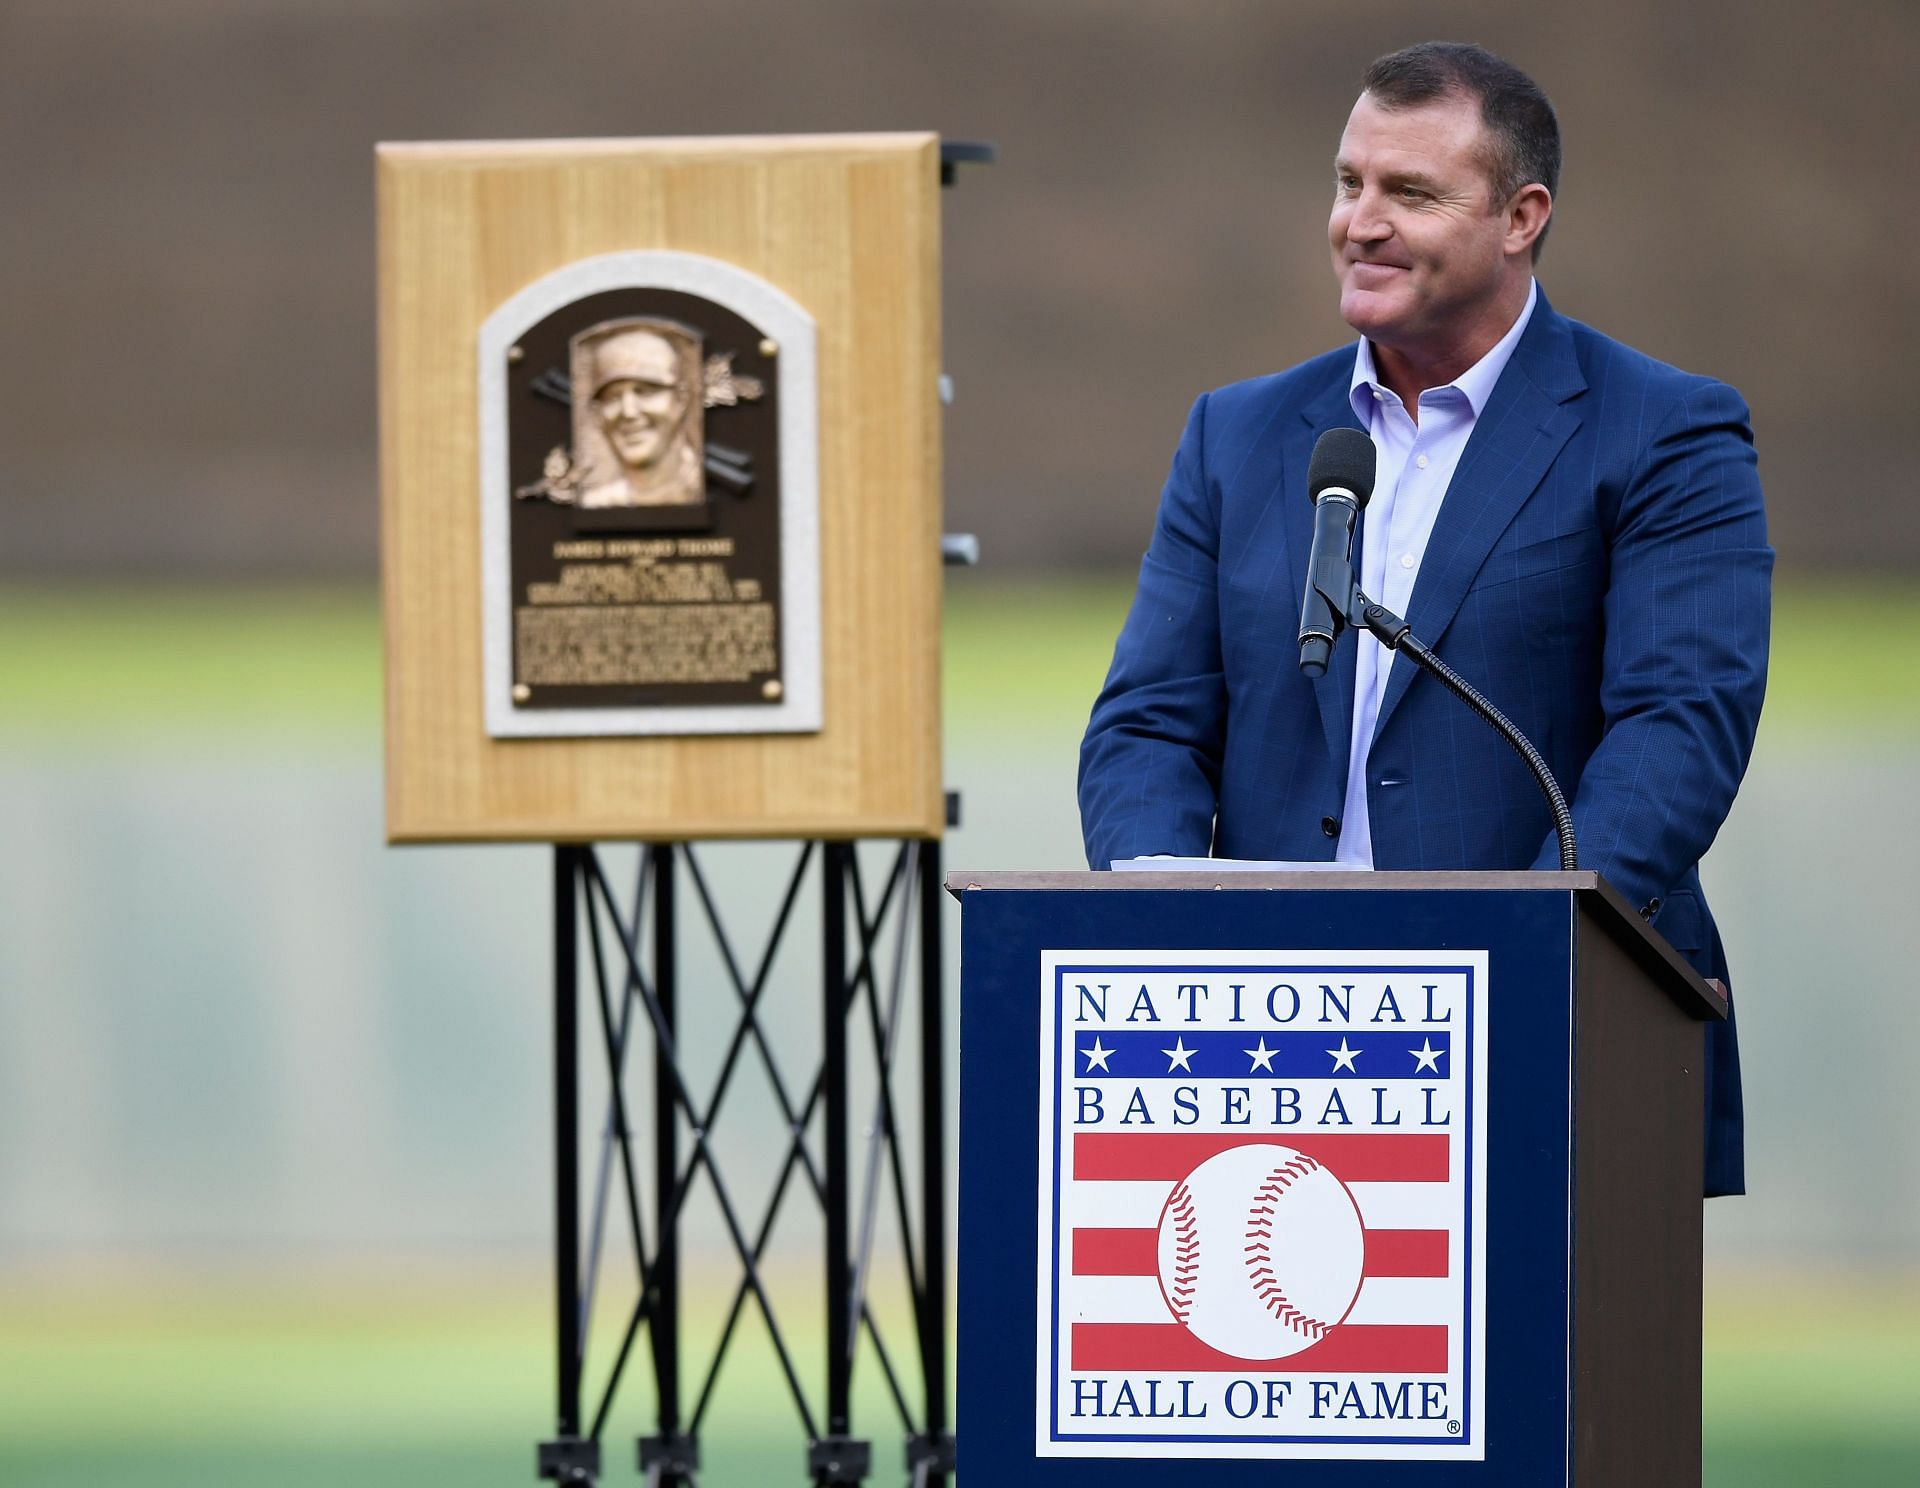 National Baseball Hall of Fame and Museum - A great father-son moment  between Jim Thome and his son Landon at the #FieldOfDreamsGame - no better  way to connect generations! Hey Jim and